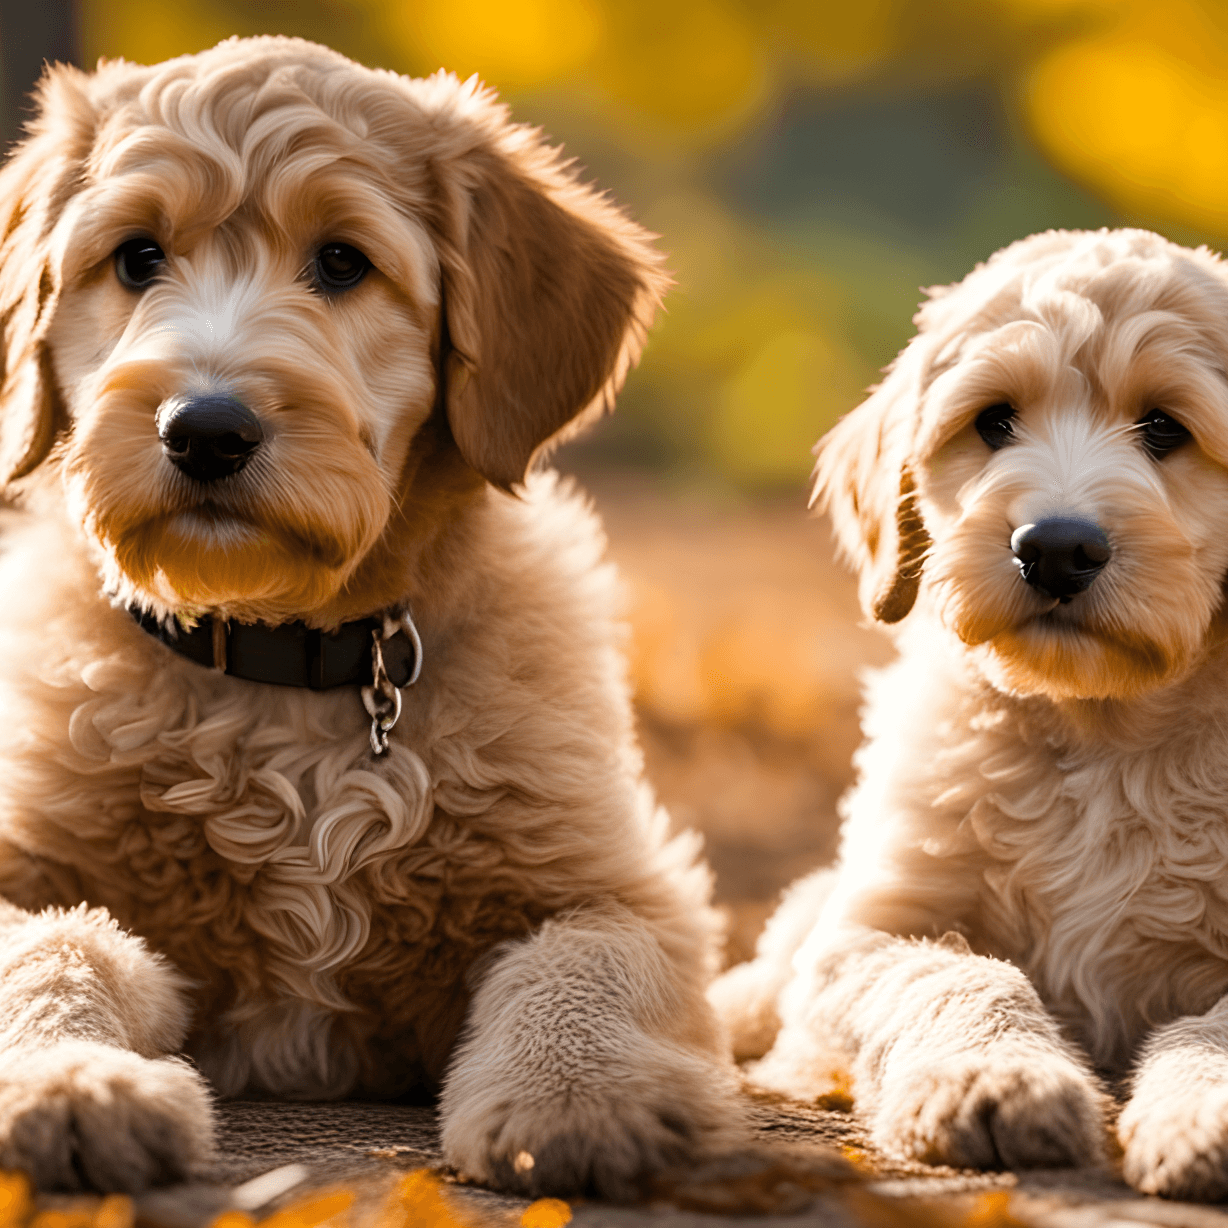 Labradoodle Puppy and Adult Dog Sitting Side by Side